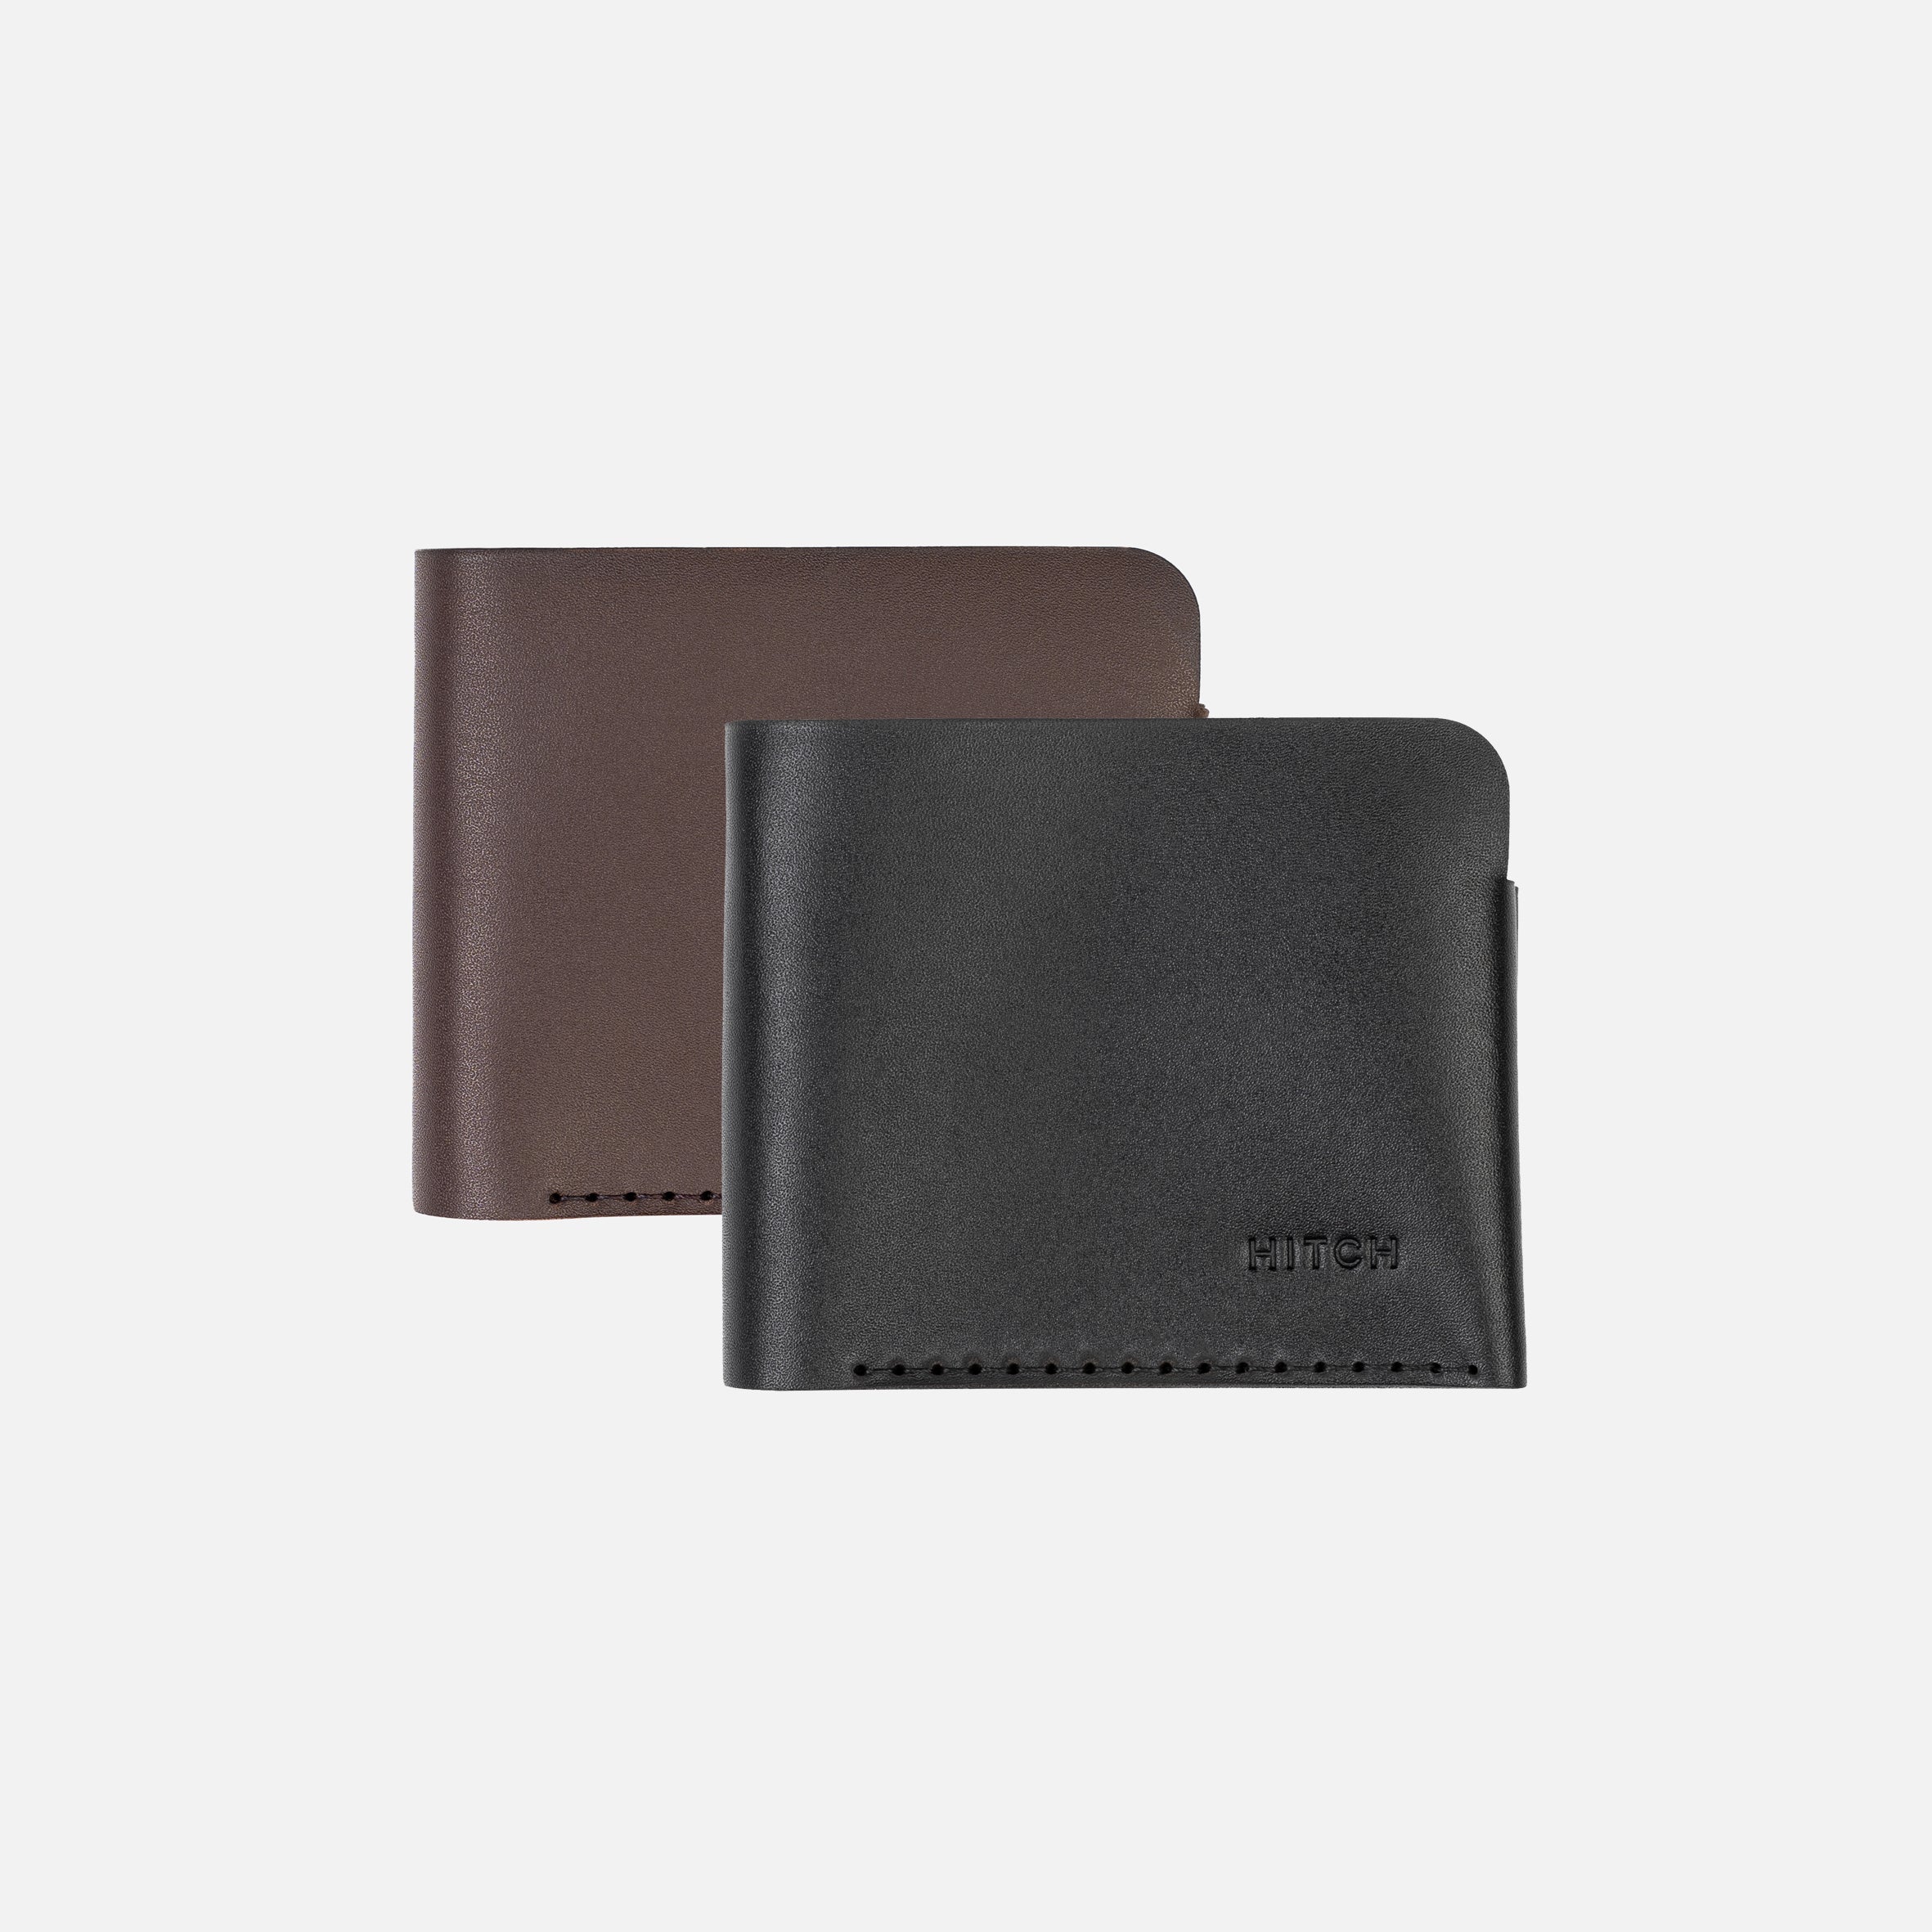 Two leather bifold wallets, one brown and one black, isolated on a white background.